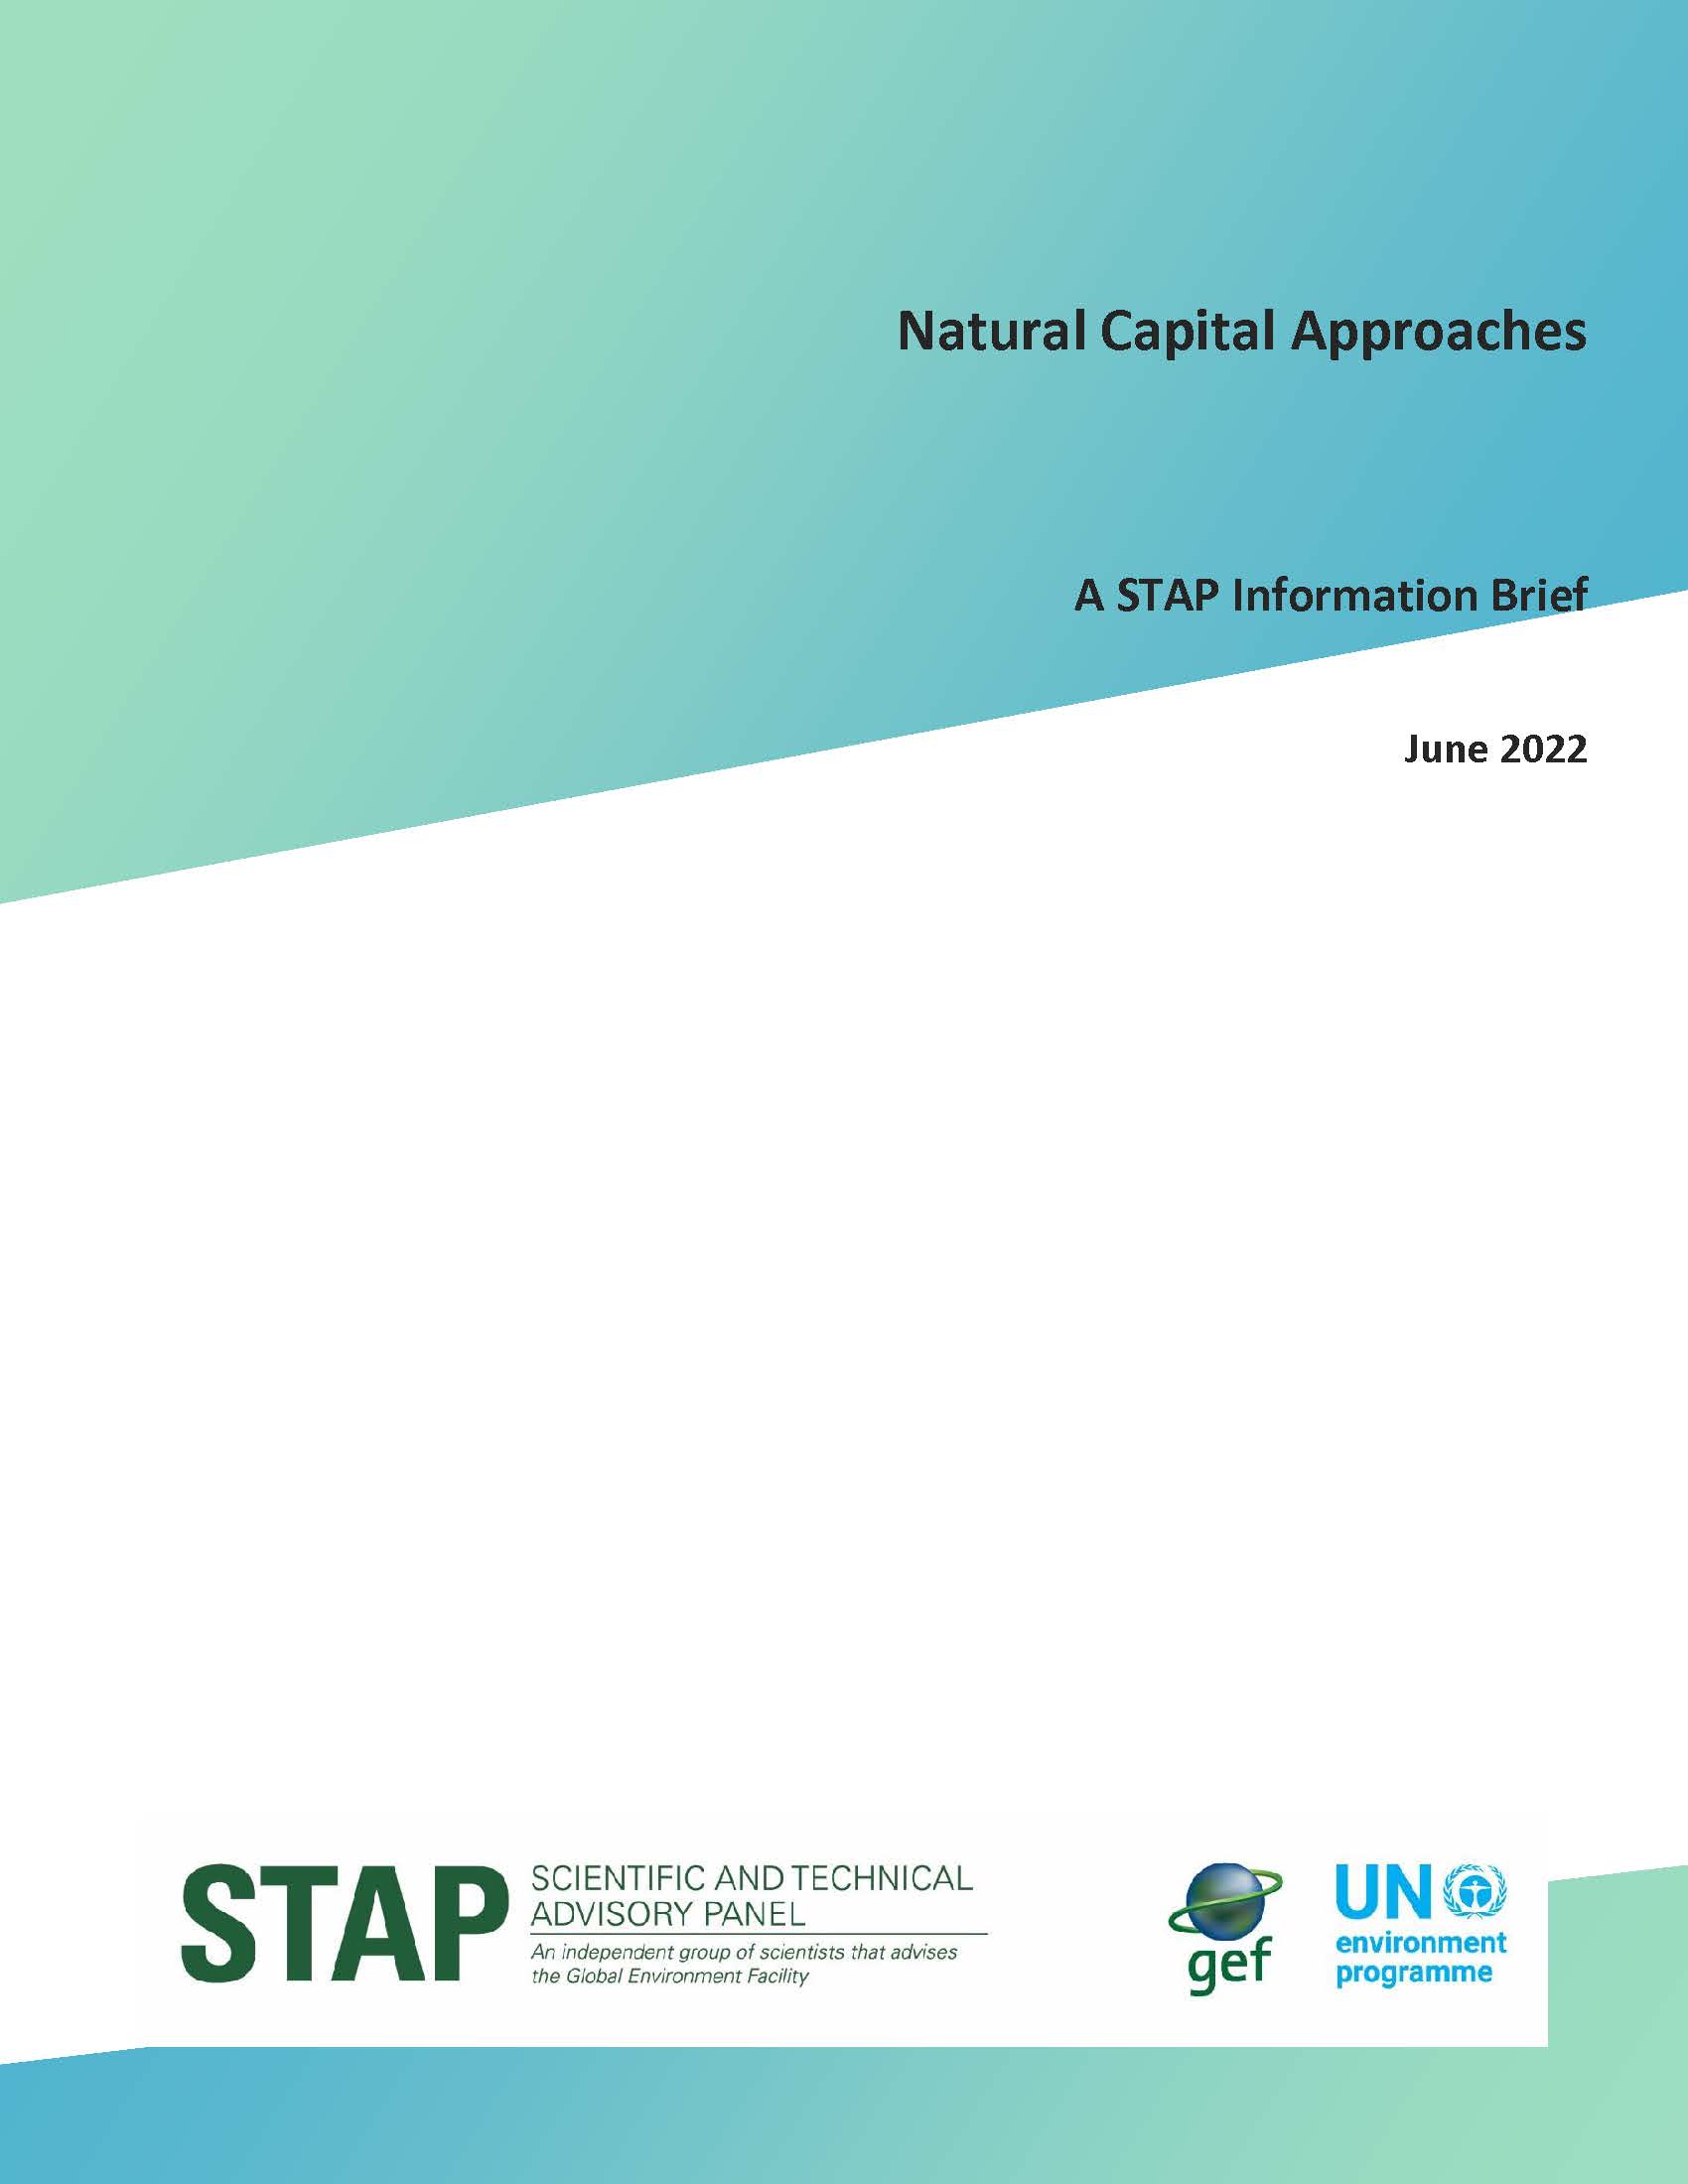 Natural capital approaches